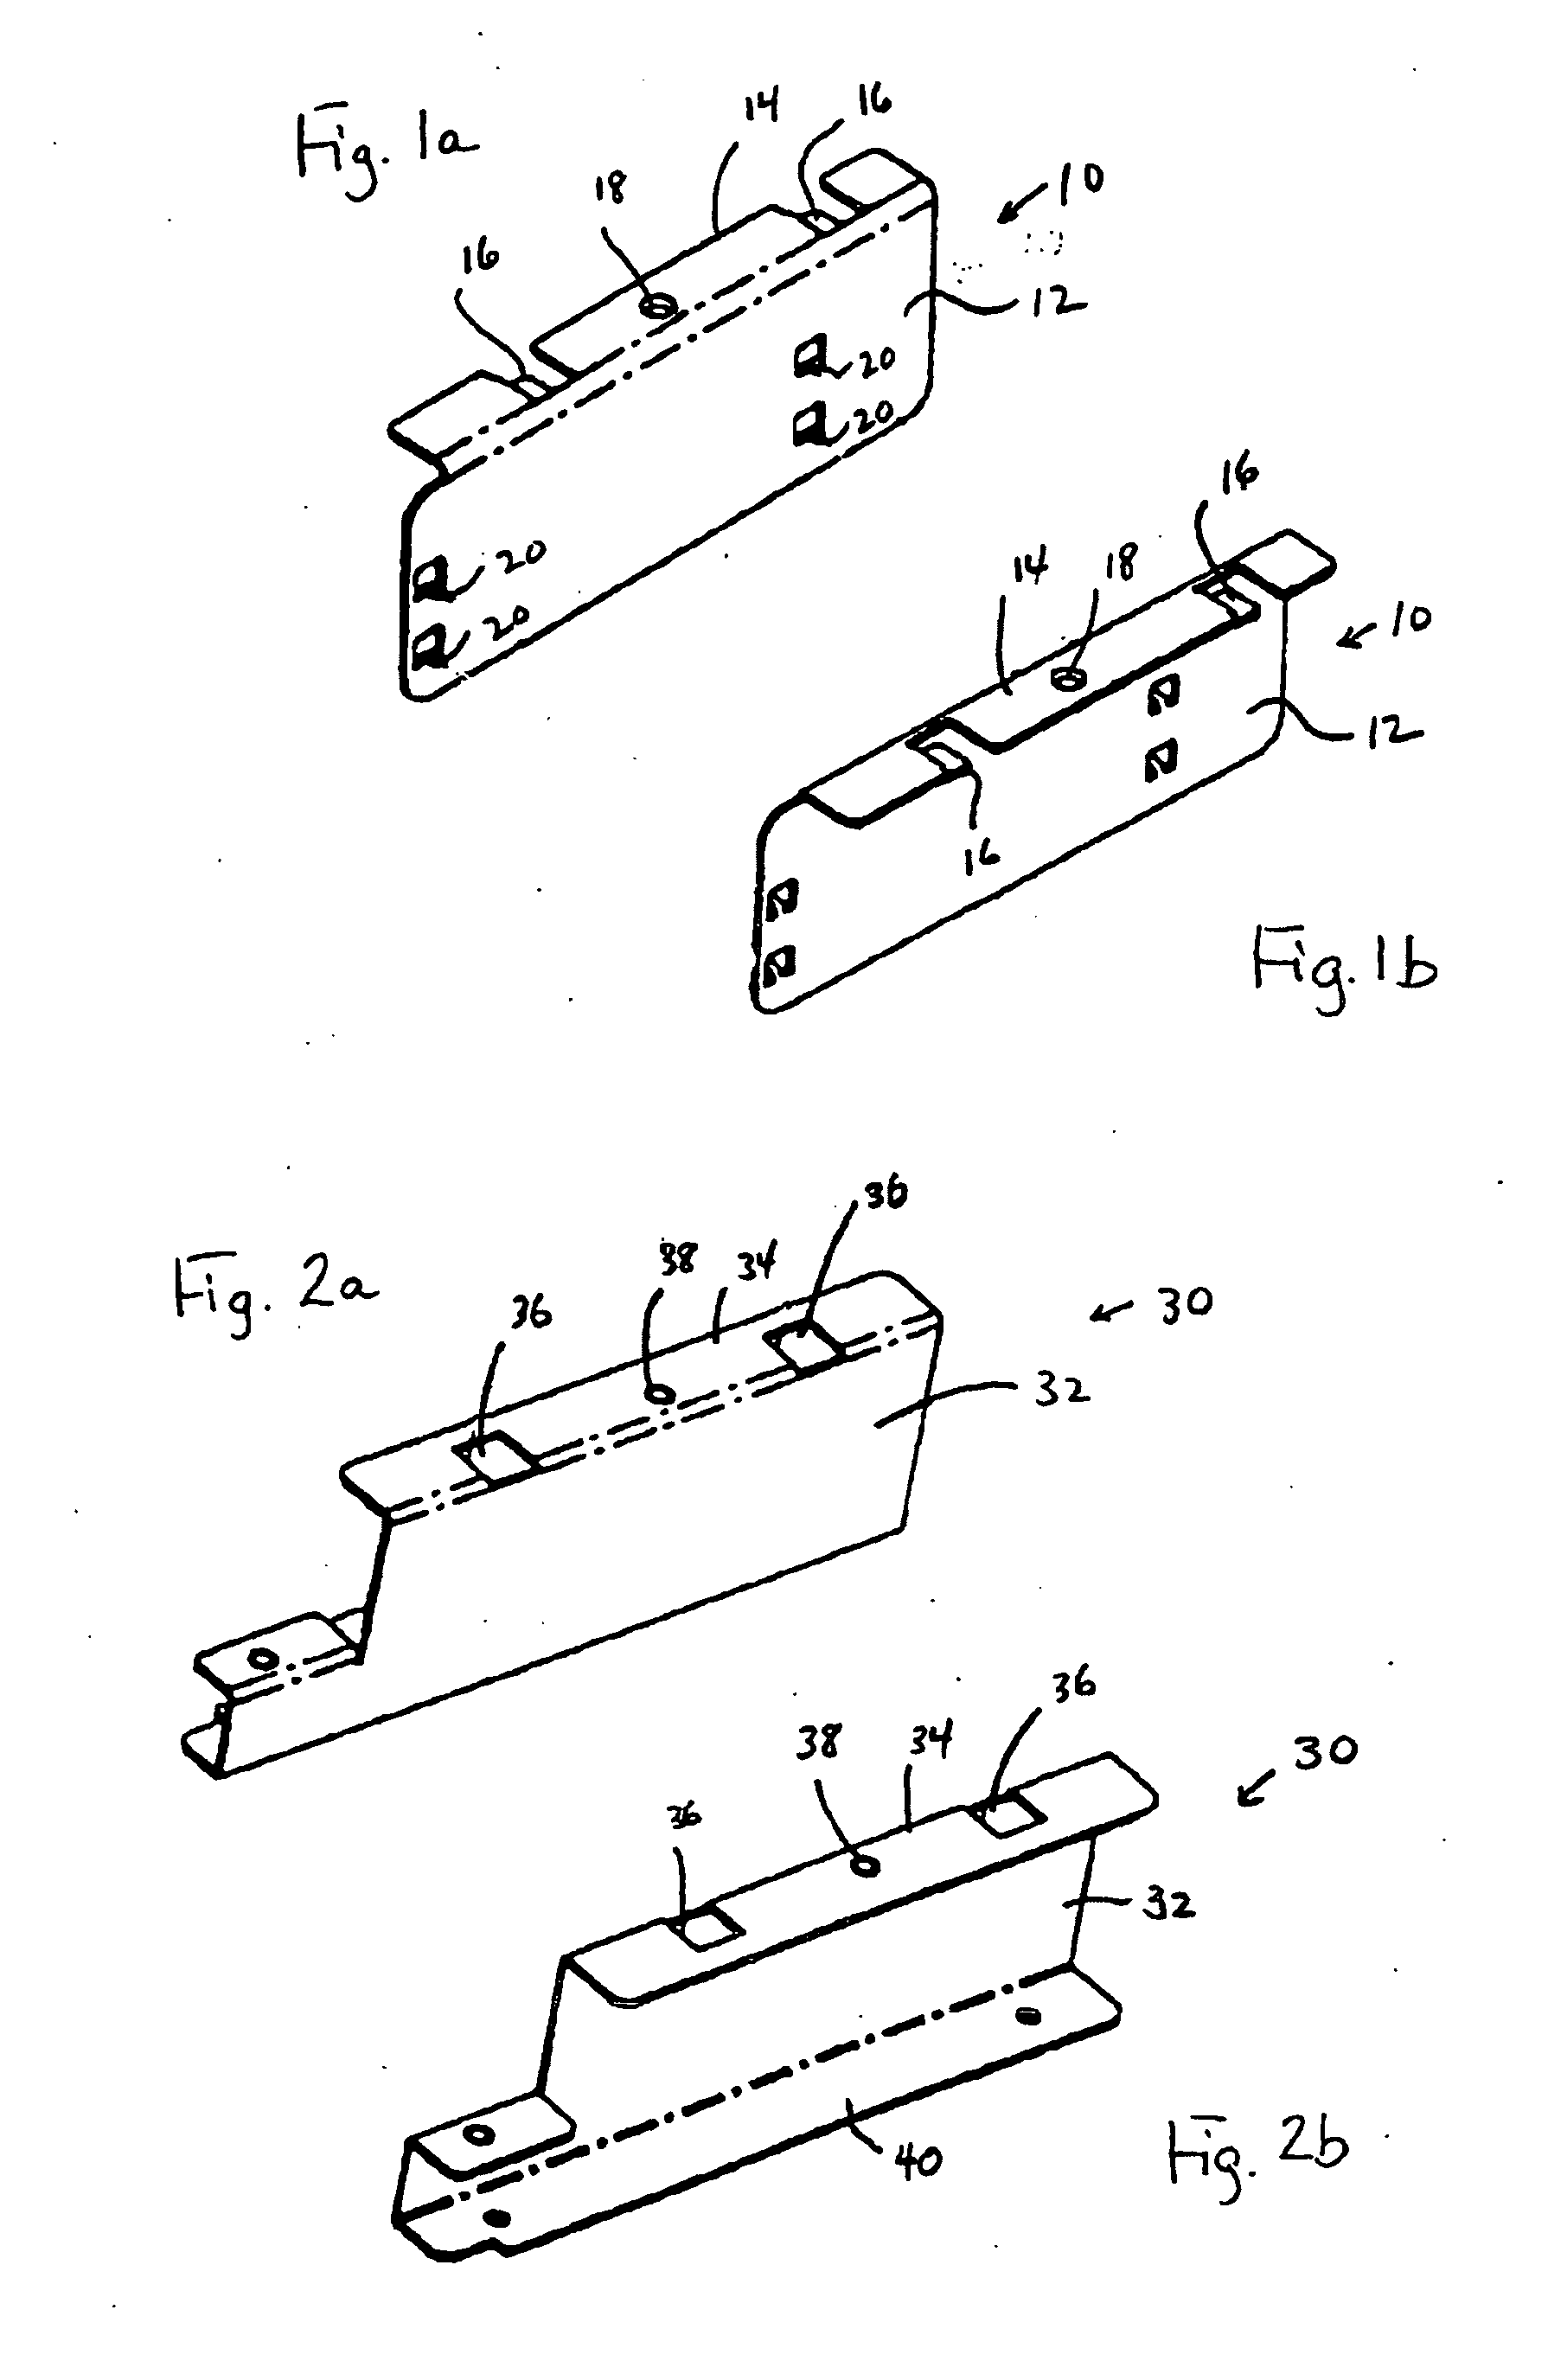 Computer peripheral device mounting arrangement with two locking elements